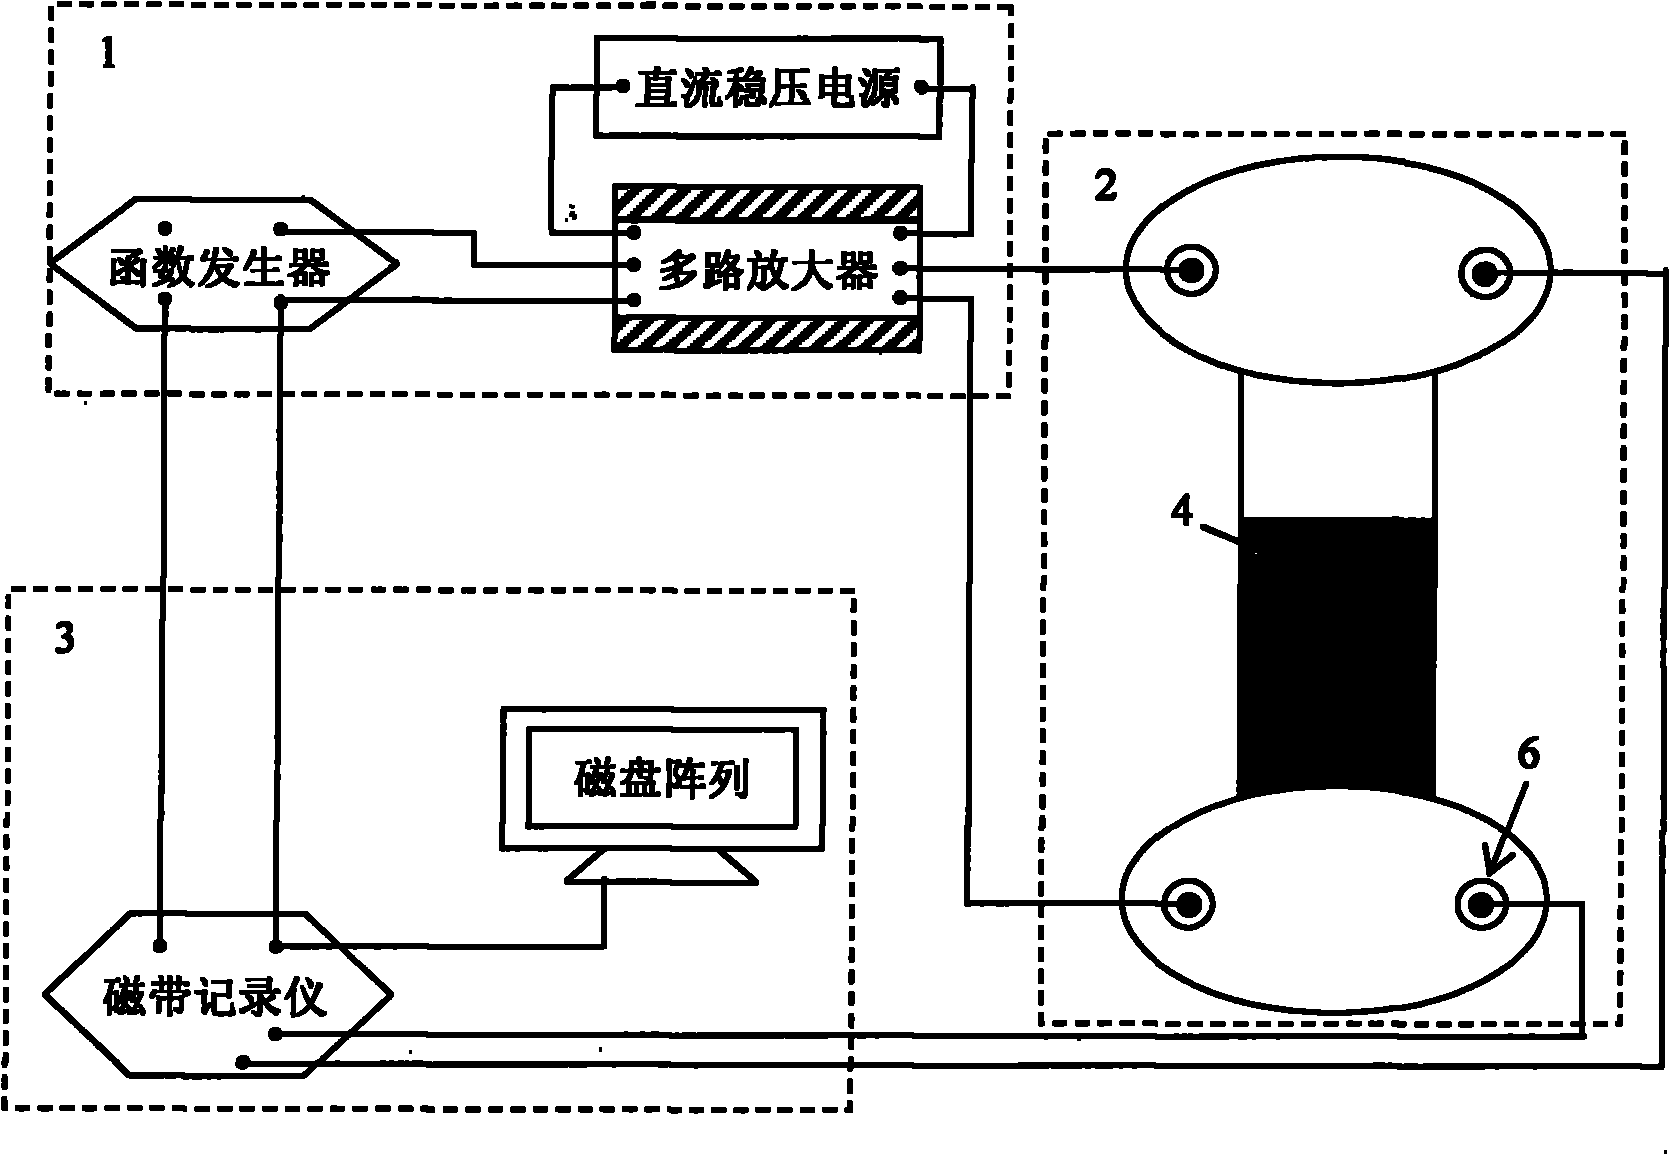 System for testing damage to gradient composite under thermal/electric/magnetic/coupling action